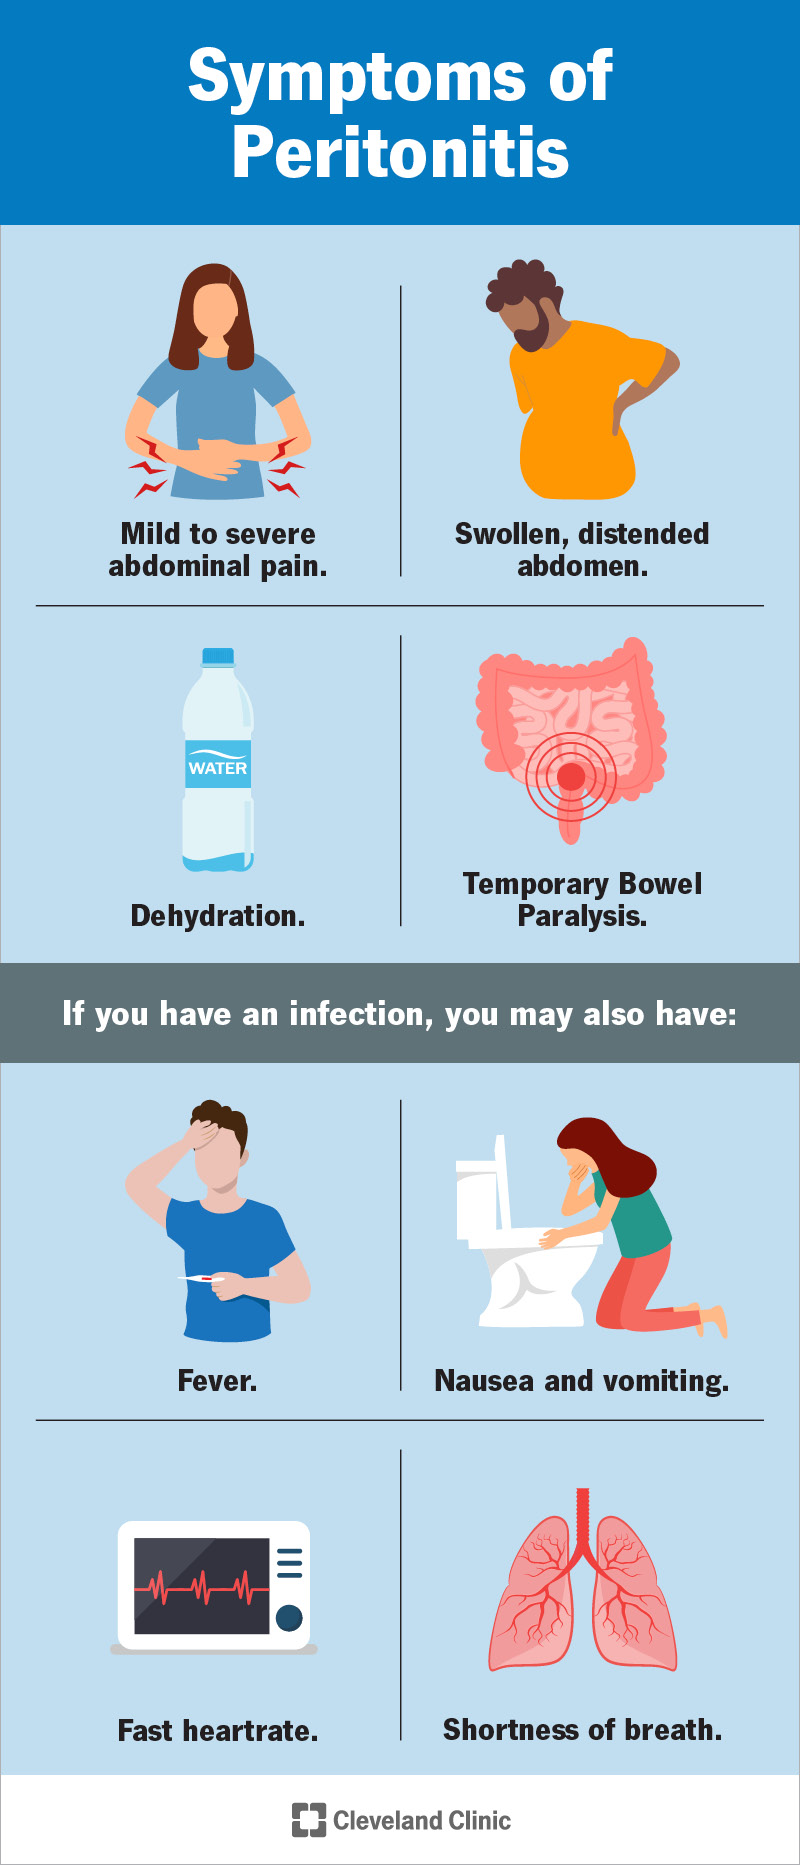 Symptoms of peritonitis include stomach pain and swelling.